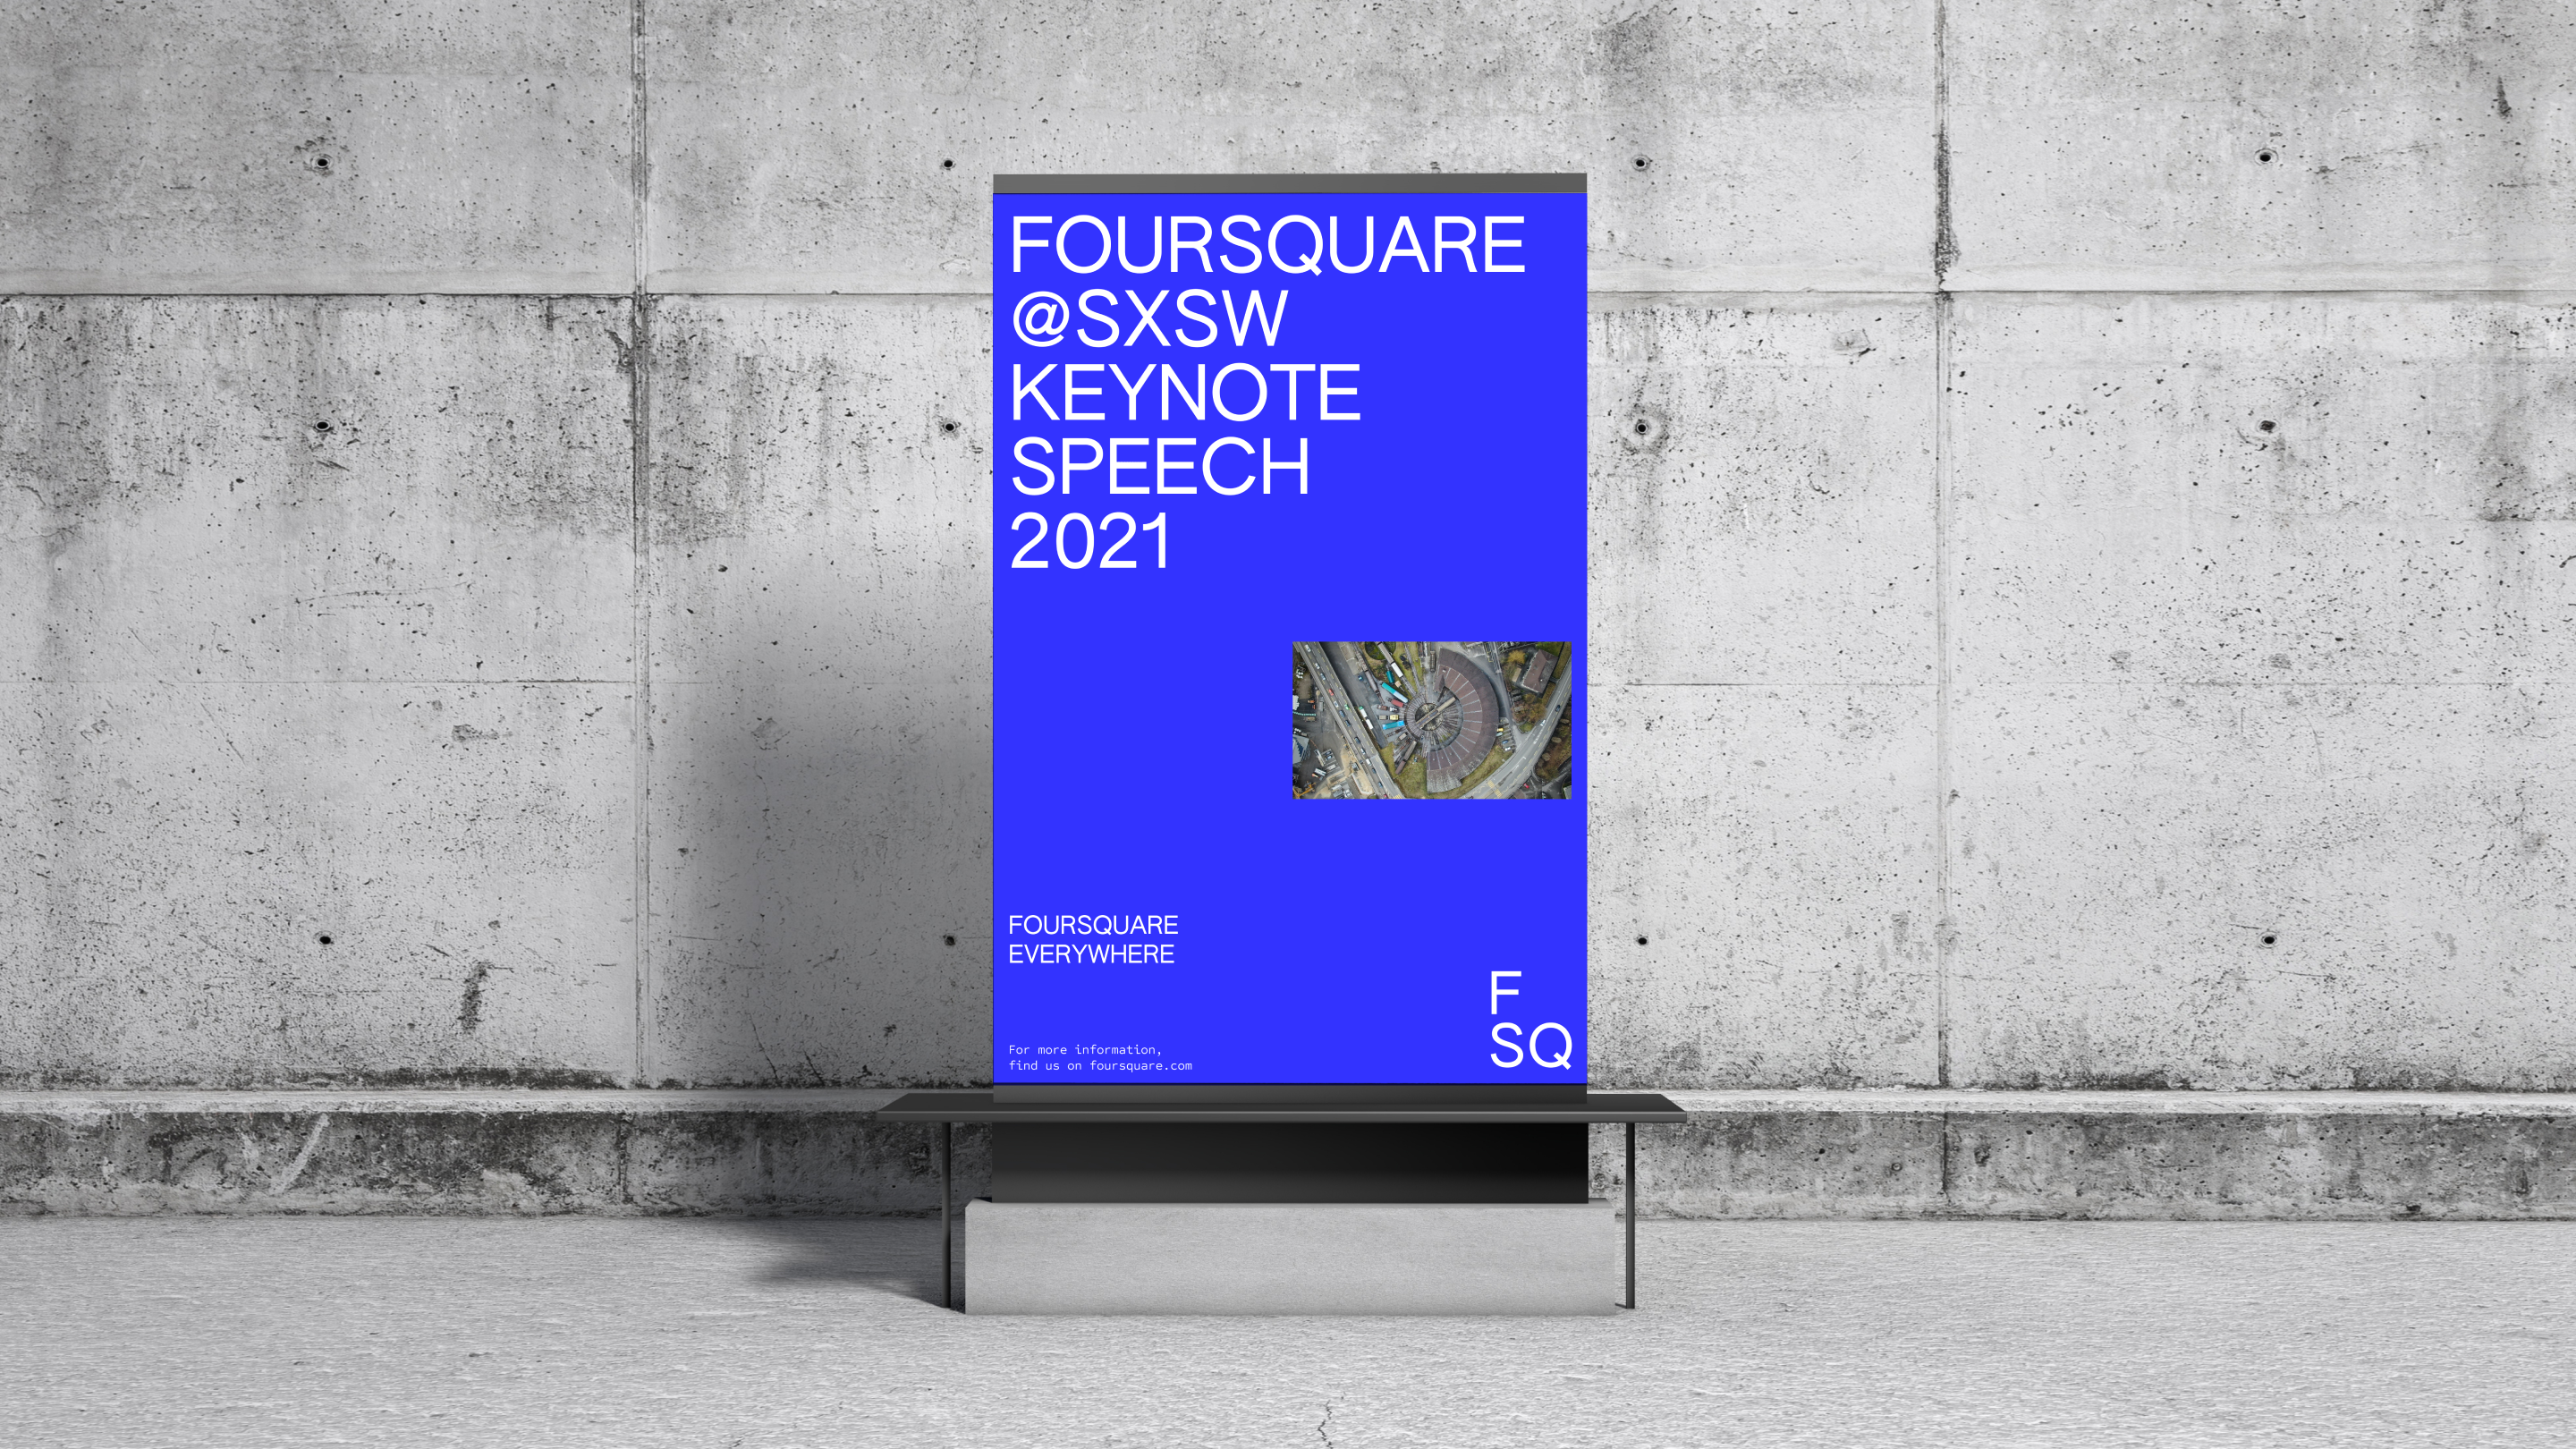 Brand New: New Logo and Identity for Foursquare by Playlab, Inc.